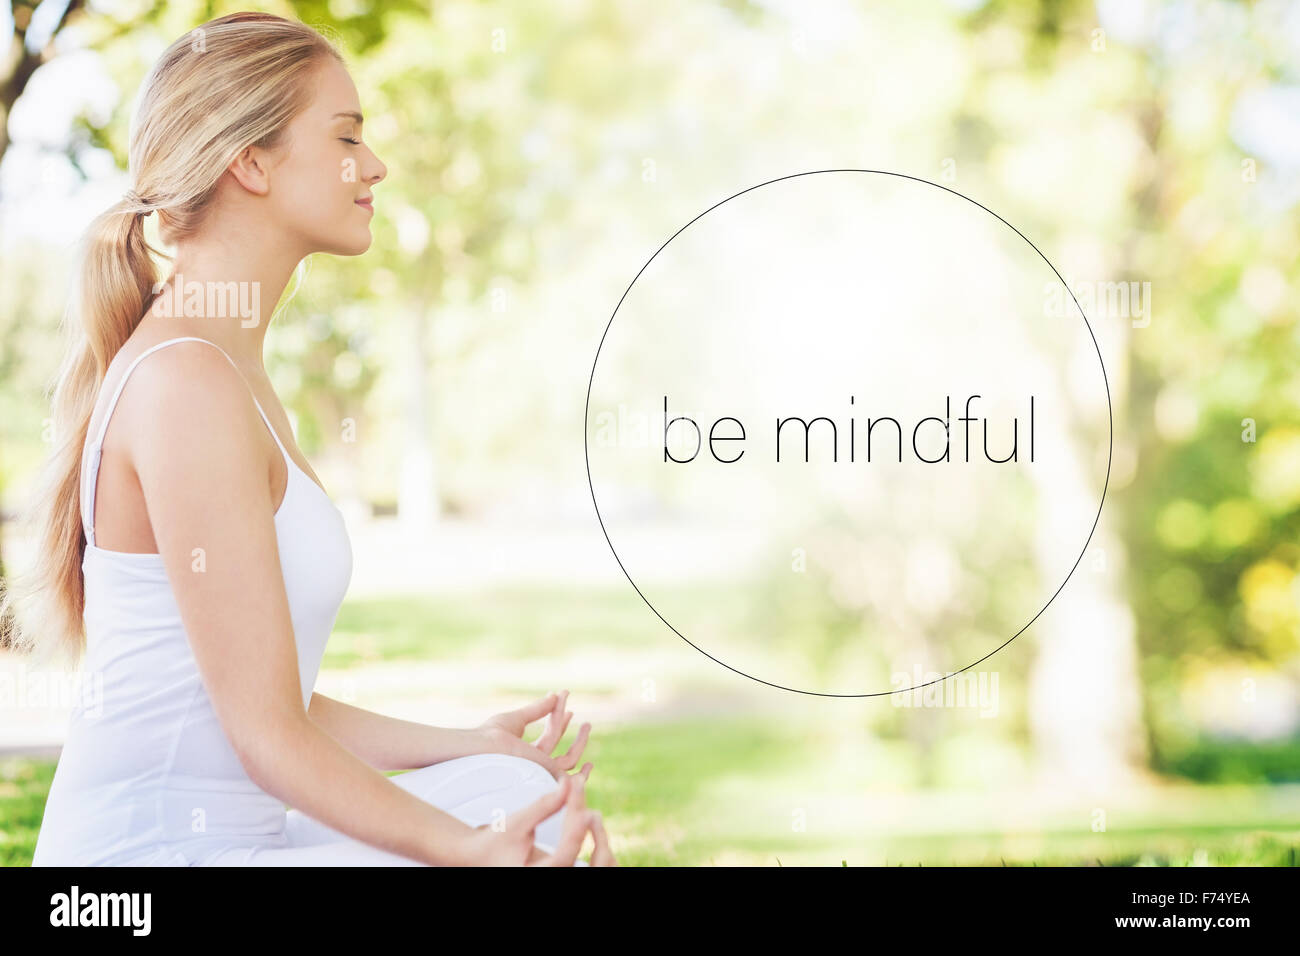 Composite image of mid section of calm young woman meditating Stock Photo